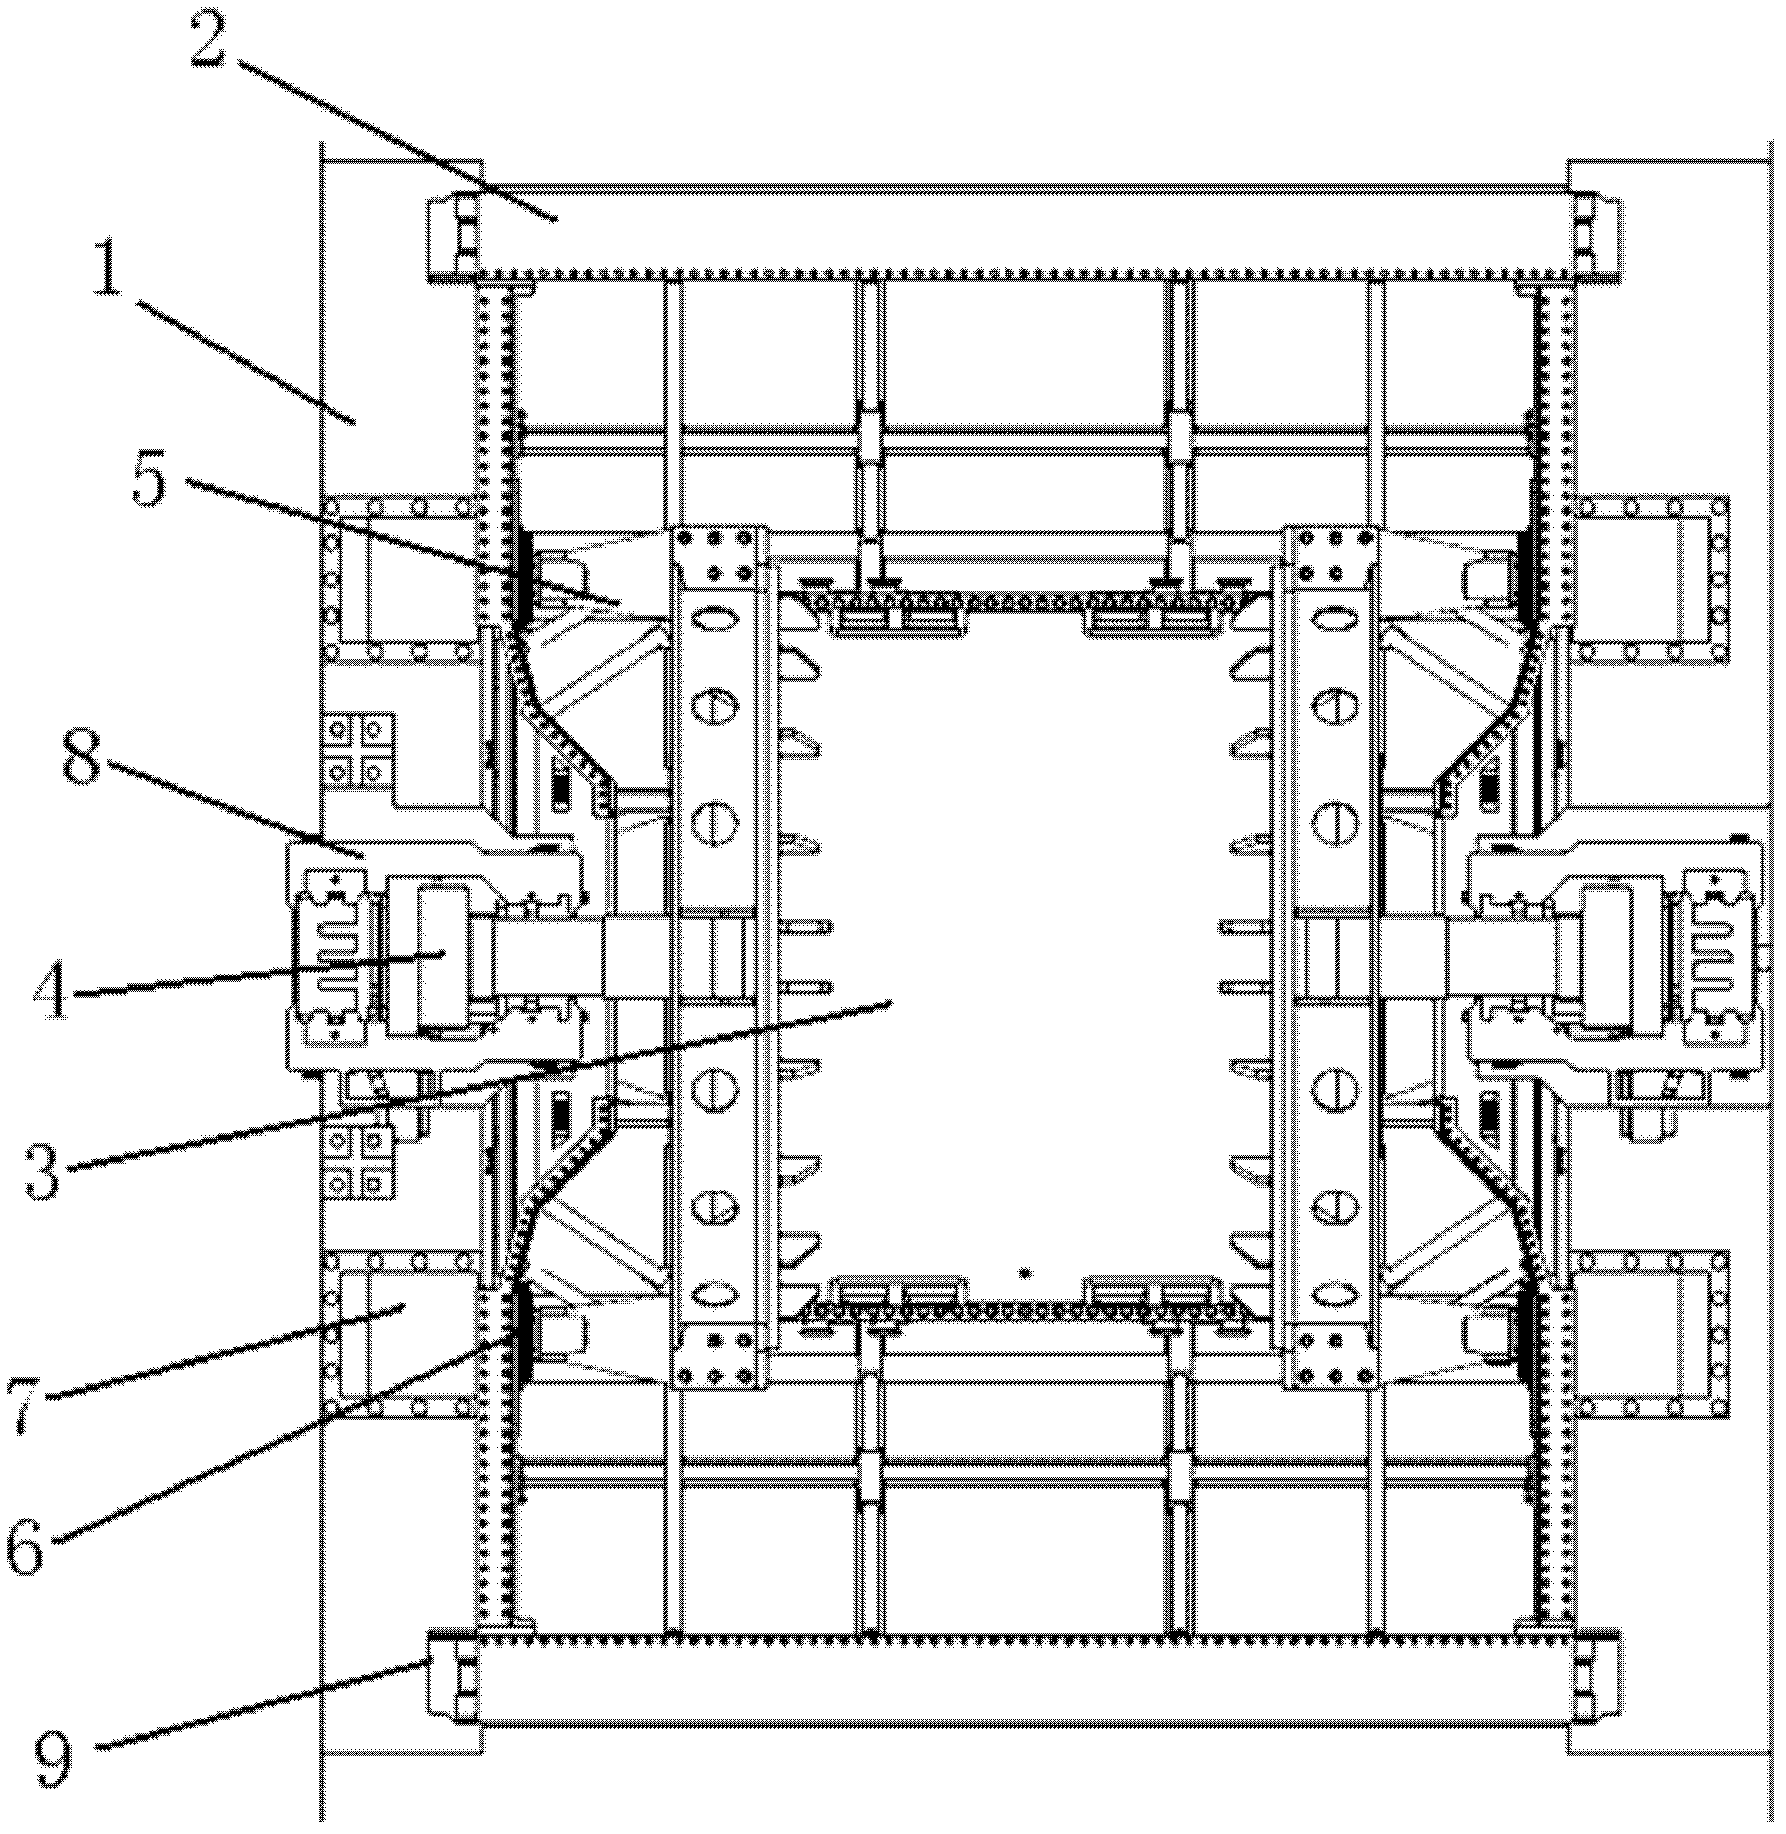 Supporting structure of low-pressure cylinder module of high-power nuclear steam turbine